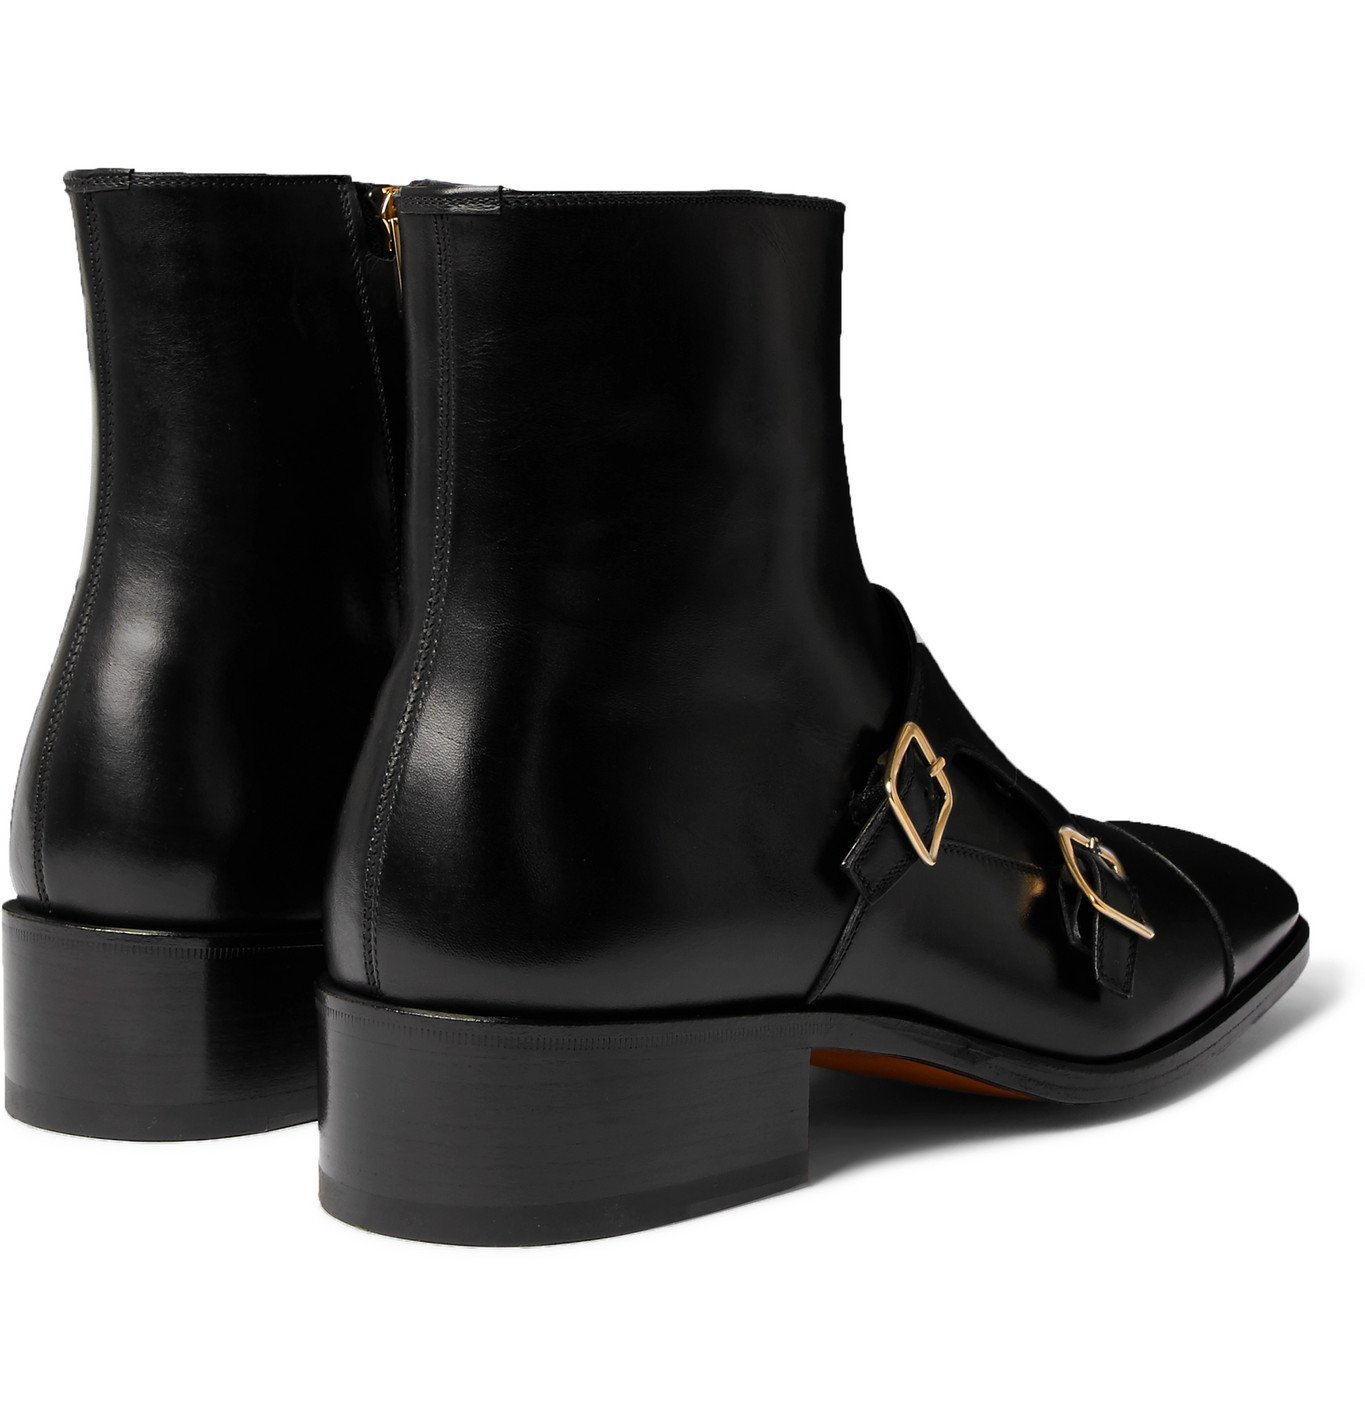 TOM FORD - Leather Monk-Strap Boots - Black TOM FORD